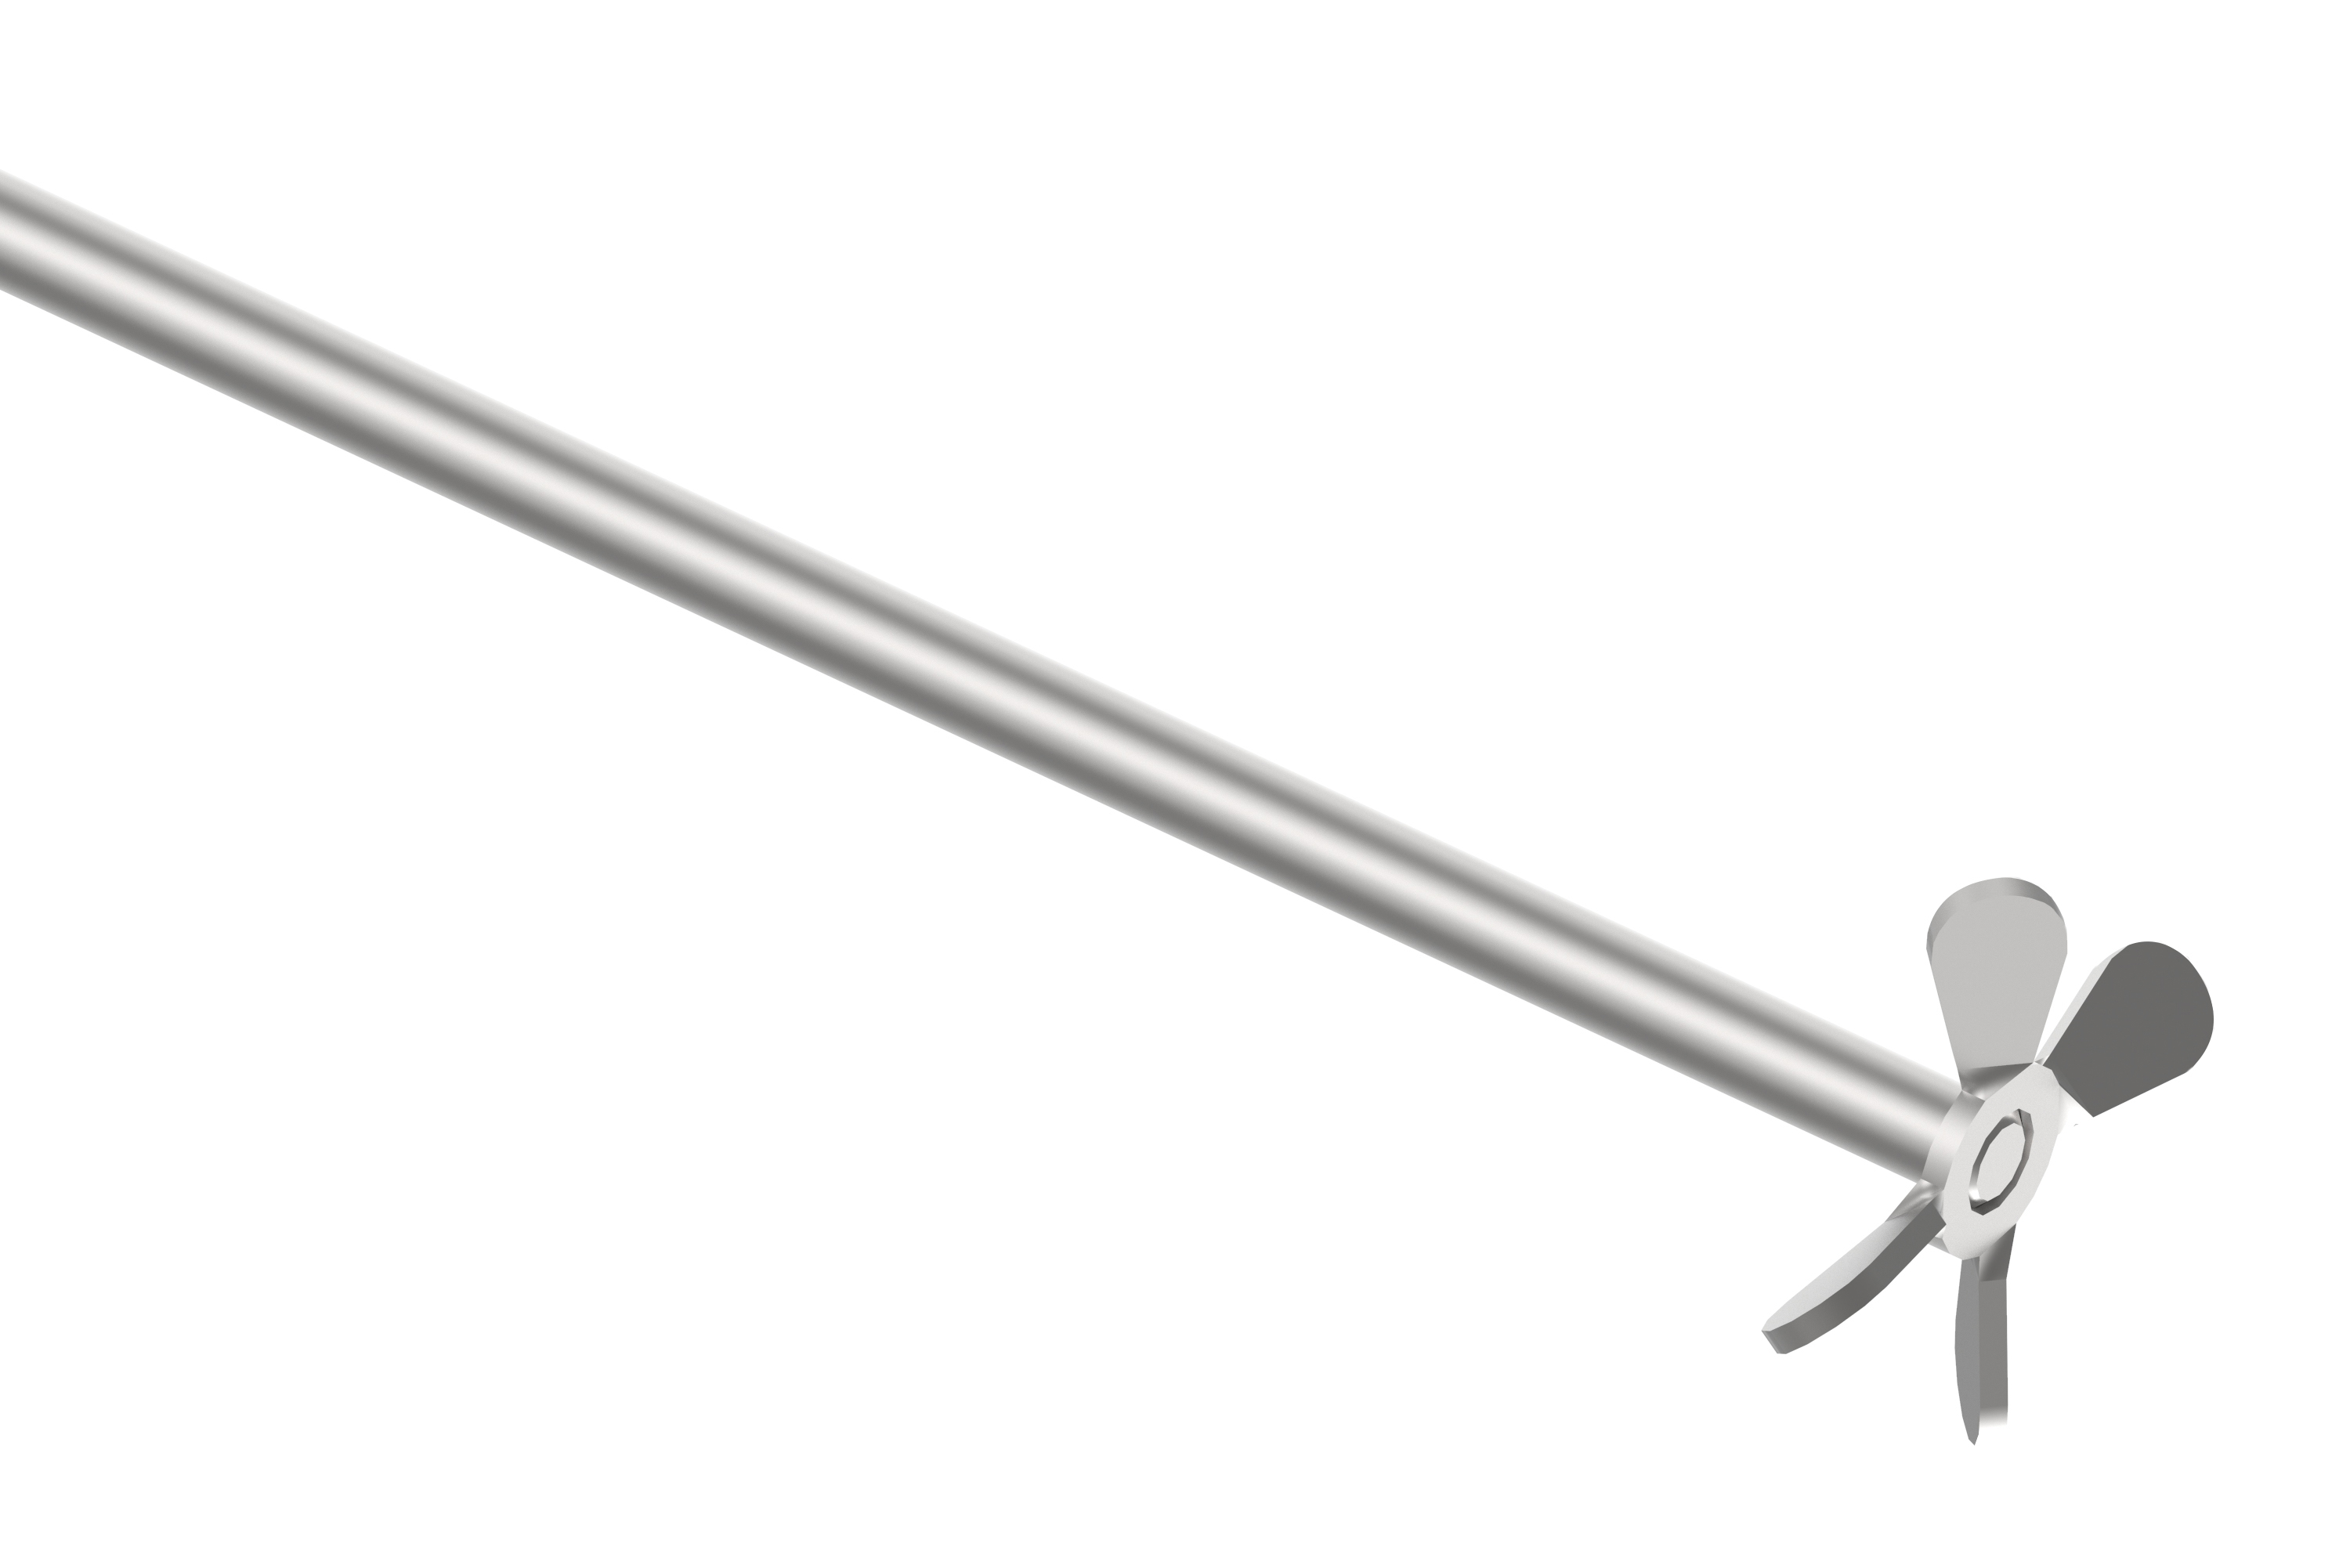 Laboratory propeller stirrer made out of stainless steel